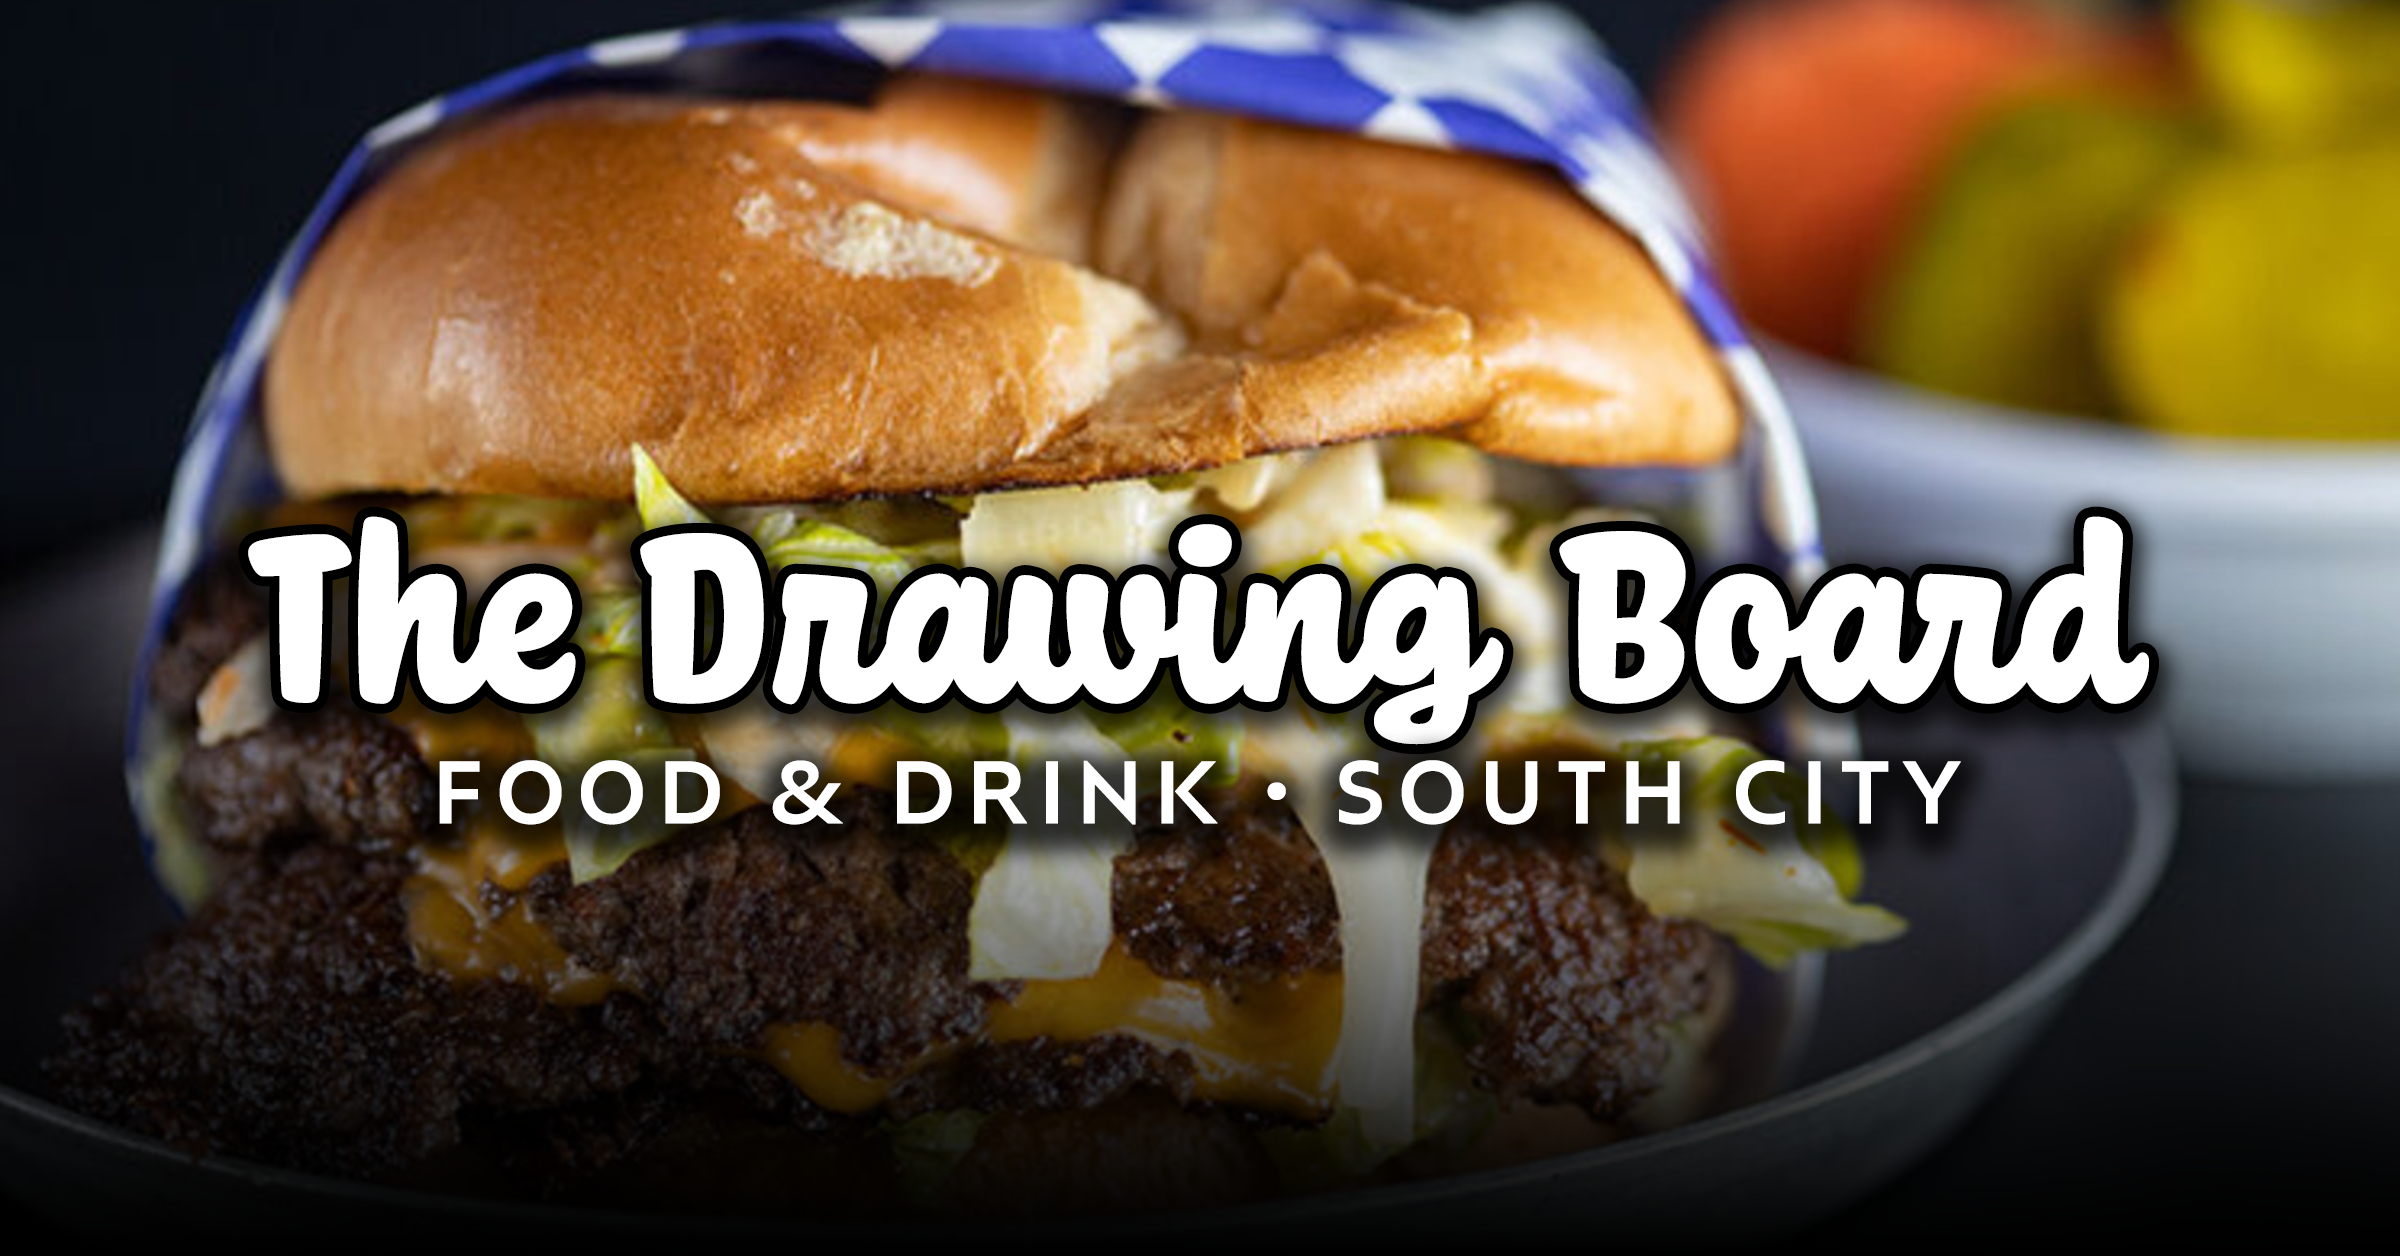 The Drawing Board, serving fine food and drink in South City, St. Louis, MO.